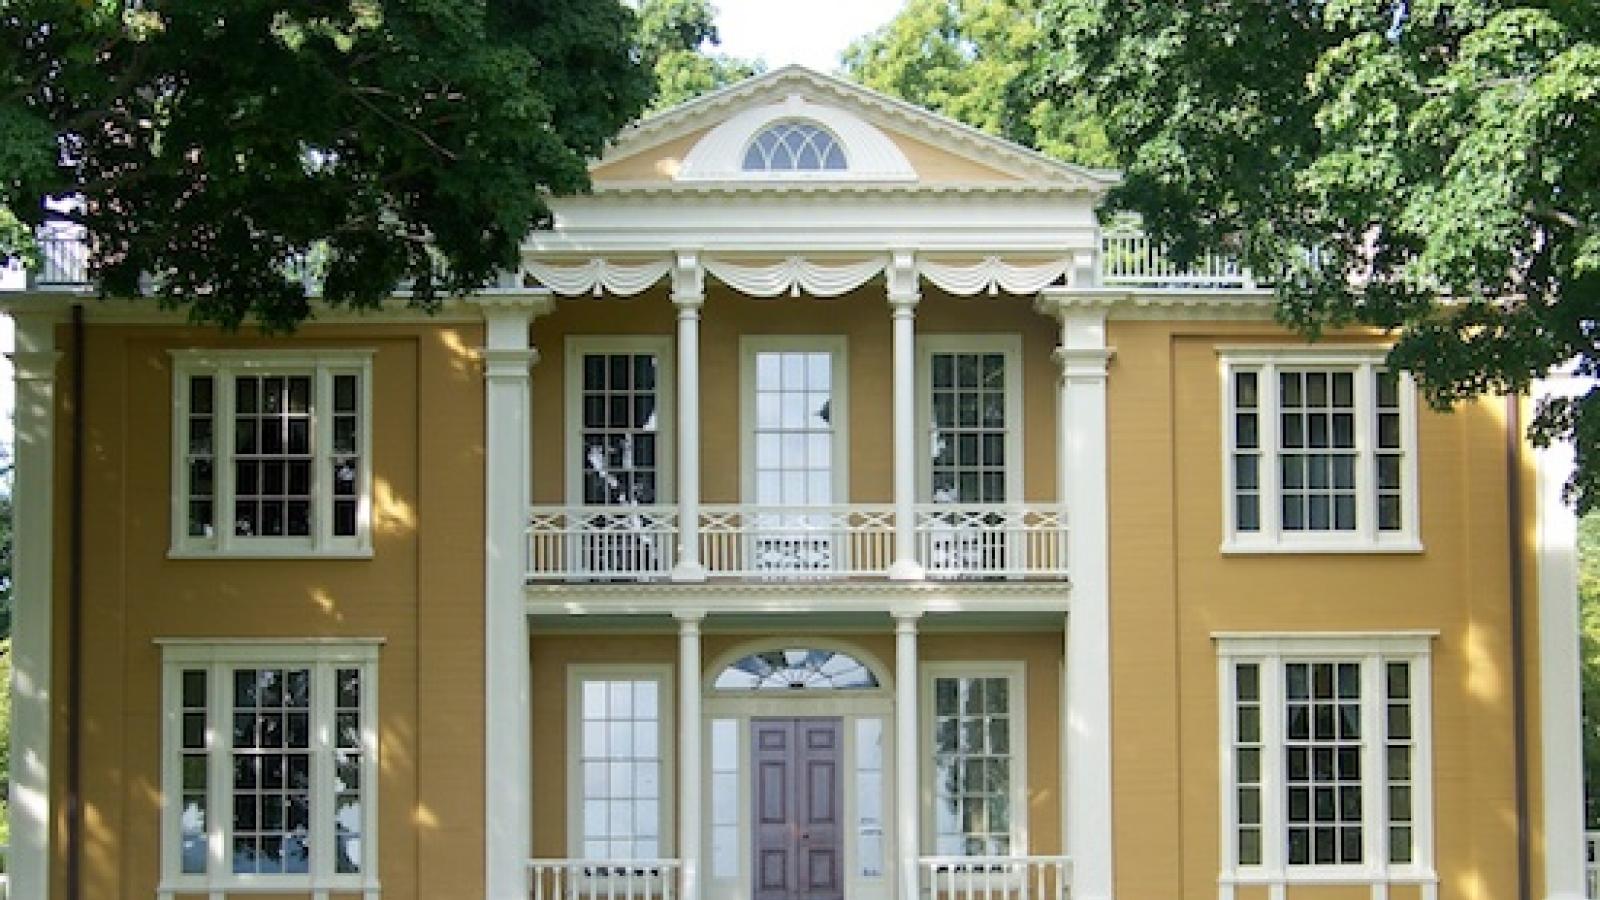 the facade of a yello multi-story Federal-style house with a columned porch and multiple windows